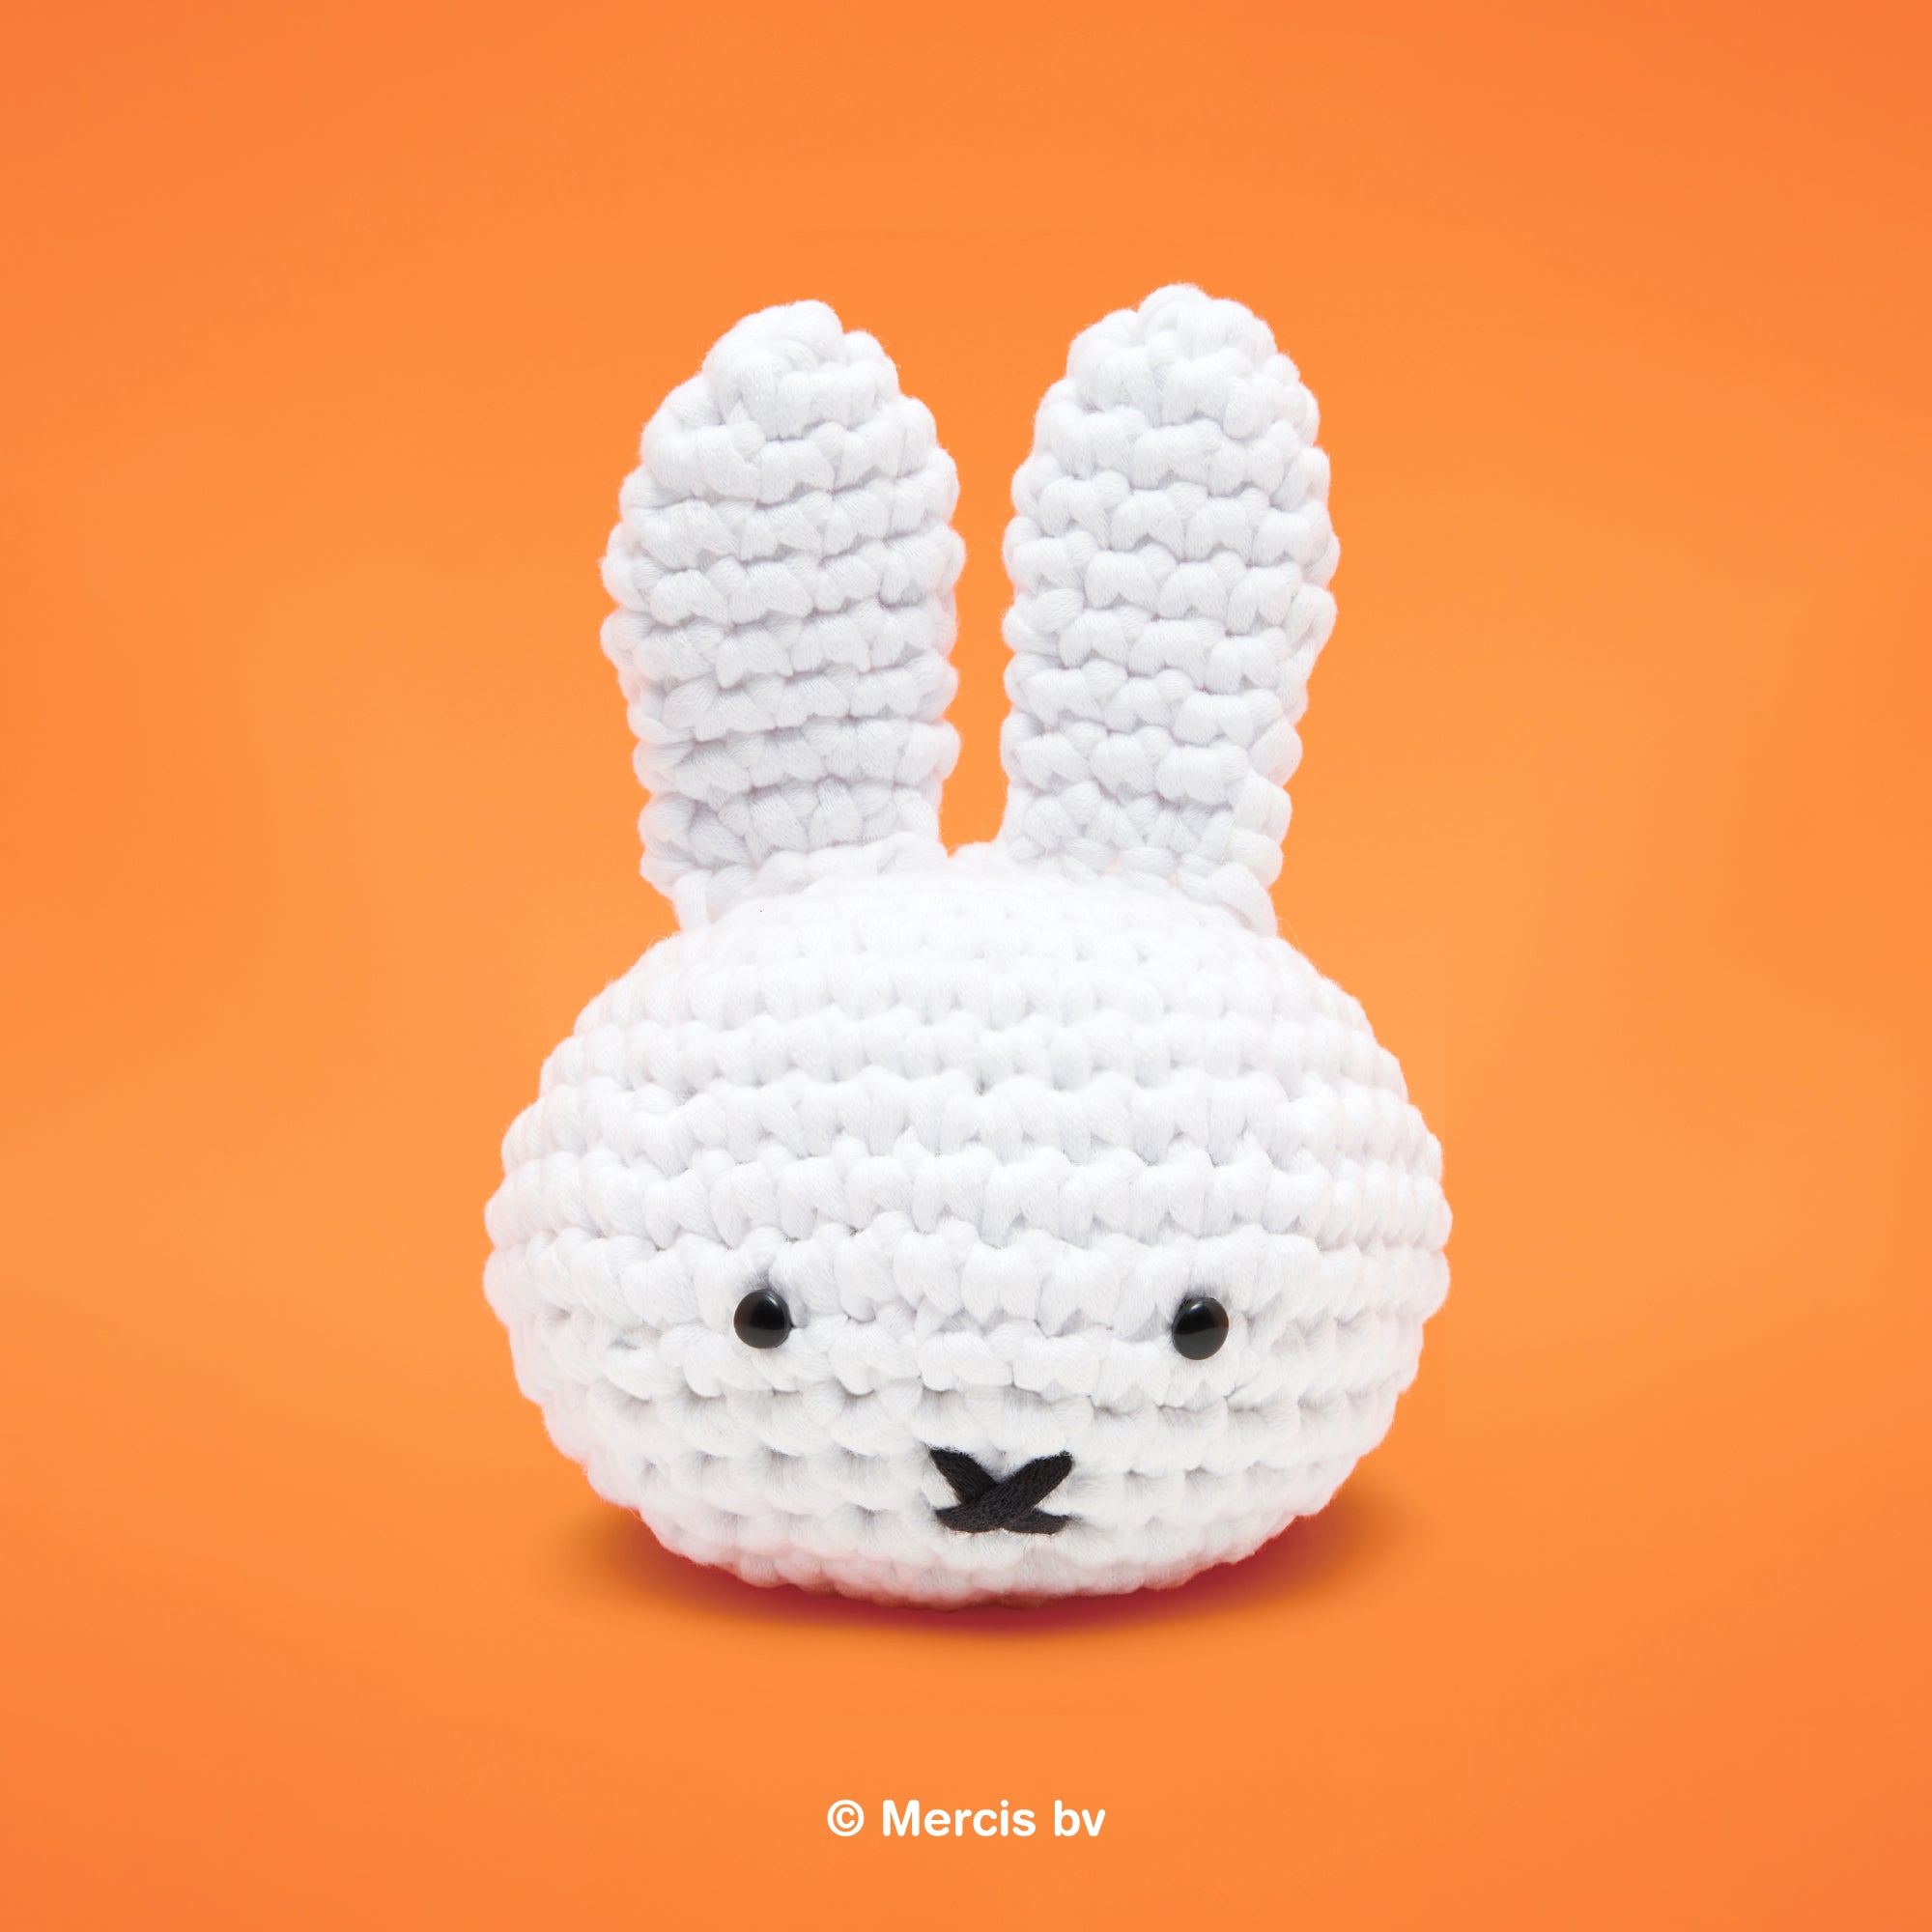 Miffy from the Woobles kit! 🐰 🧶 #crochet #woobles #miffy #woobleskit